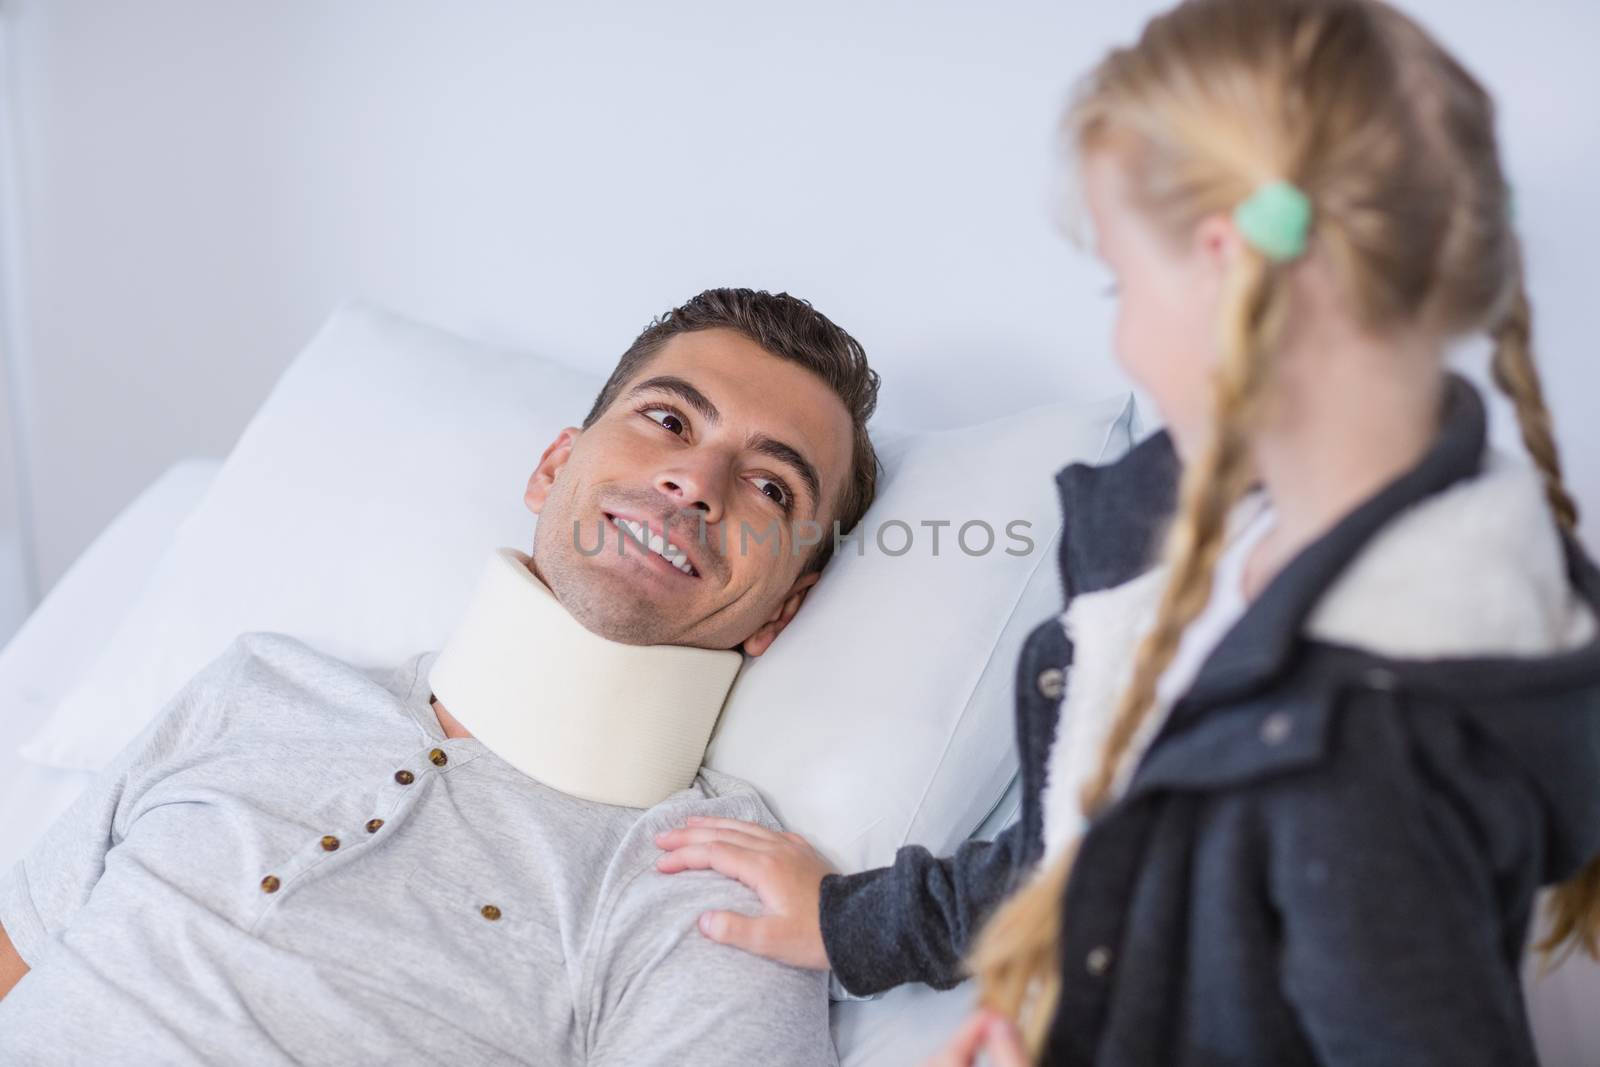 Smiling daughter comforting her sick father in hospital room